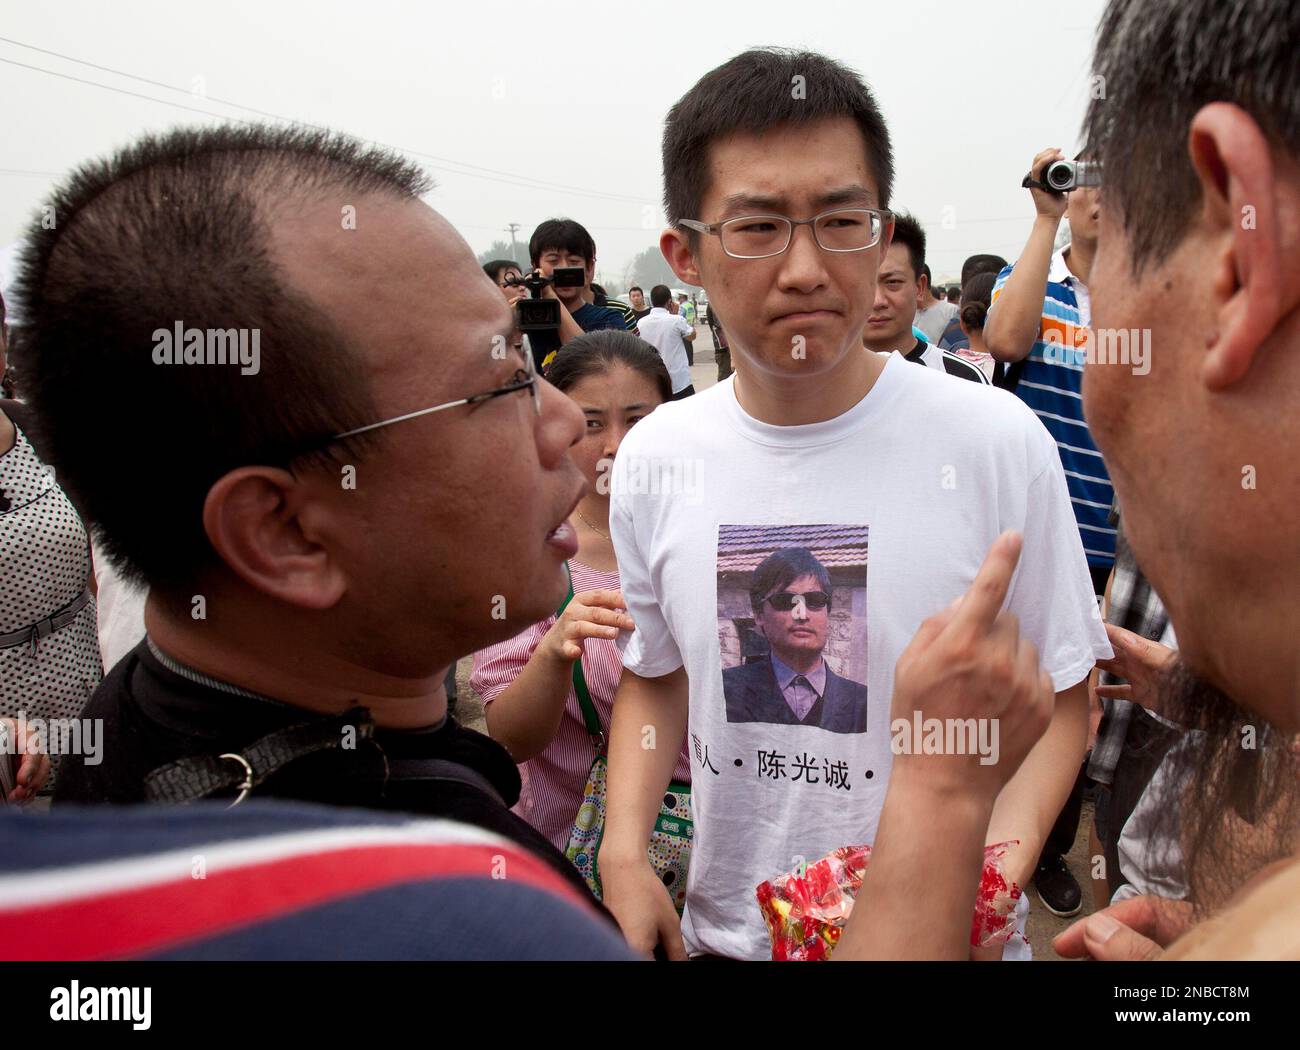 Qi Jianxiang, center, son of Wang Lihong, chats with Zhao Lianhai, left, an activist previously jailed for protesting a massive tainted milk scandal, outside the Wenyuhe People's Court in Beijing, China, Friday, Aug. 12, 2011. Wang, a Chinese activist known for pushing legal issues and backing a jailed Nobel peace laureate went on trial Friday on a vaguely worded charge, reinforcing Beijing's sweeping crackdown on dissent. (AP Photo/Andy Wong) Stock Photo